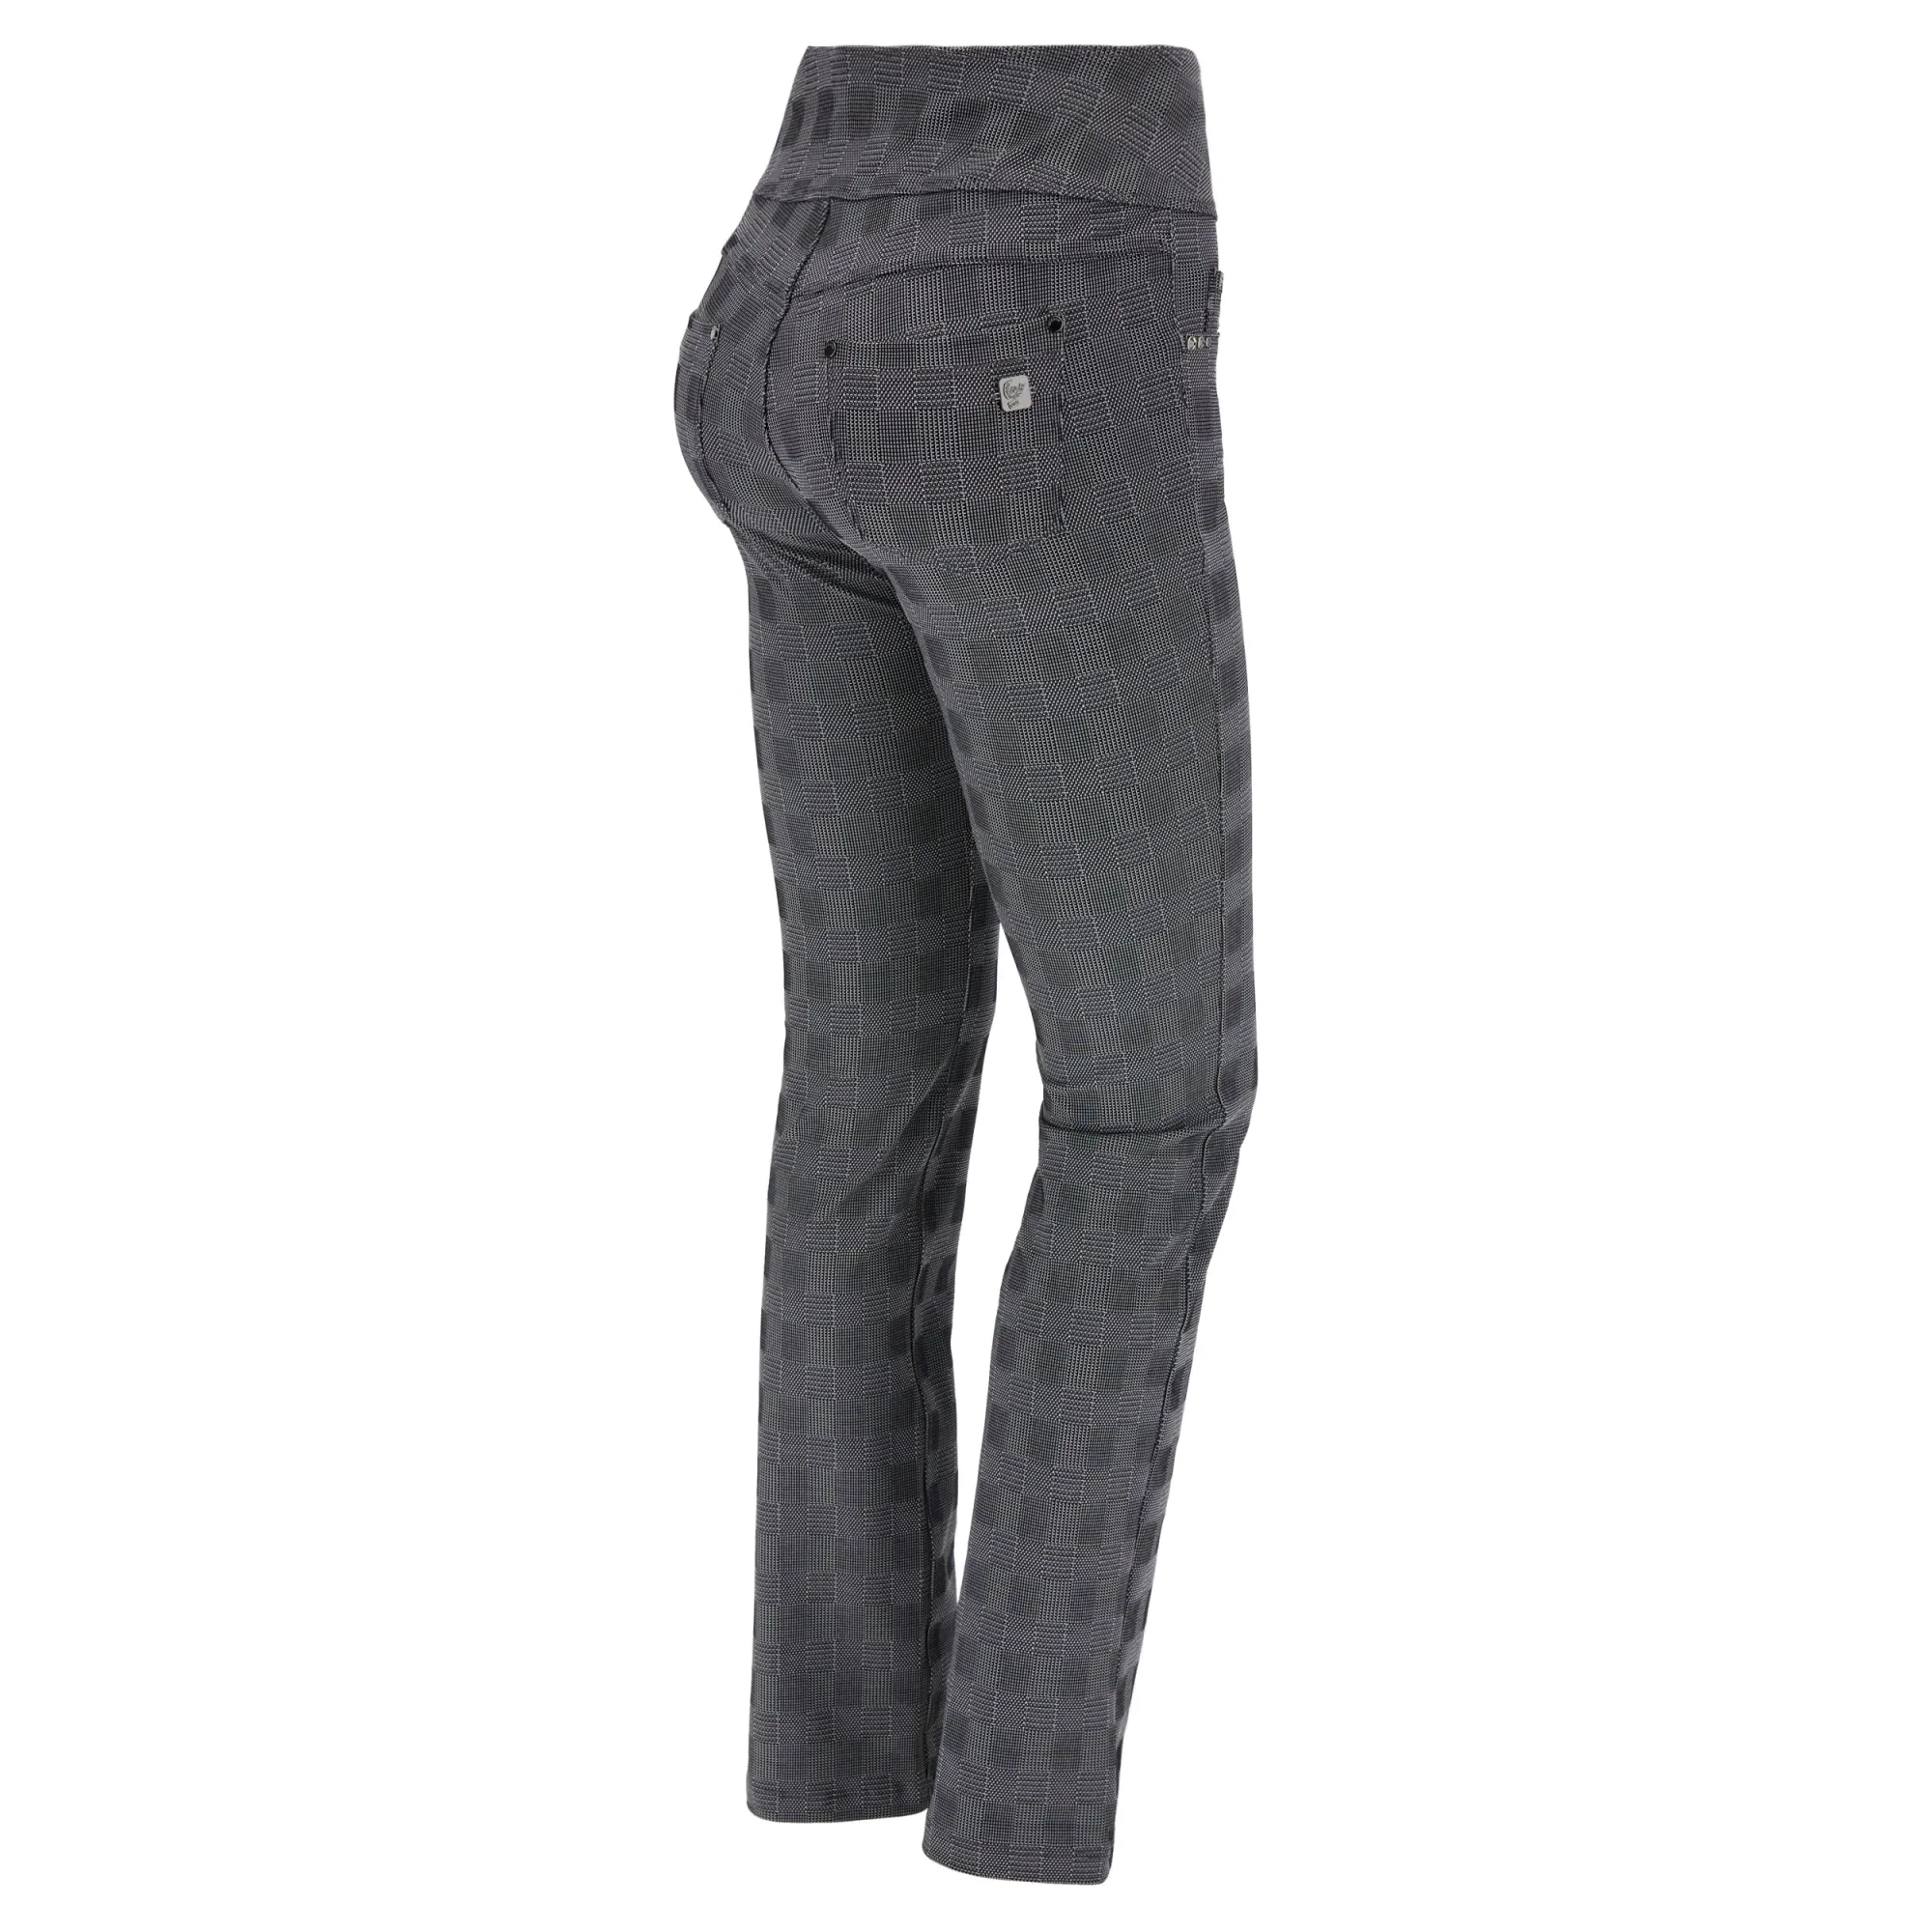 N.O.W.® Pants - Buttoned High Waist Skinny Straight - Prince of Galles - NW10